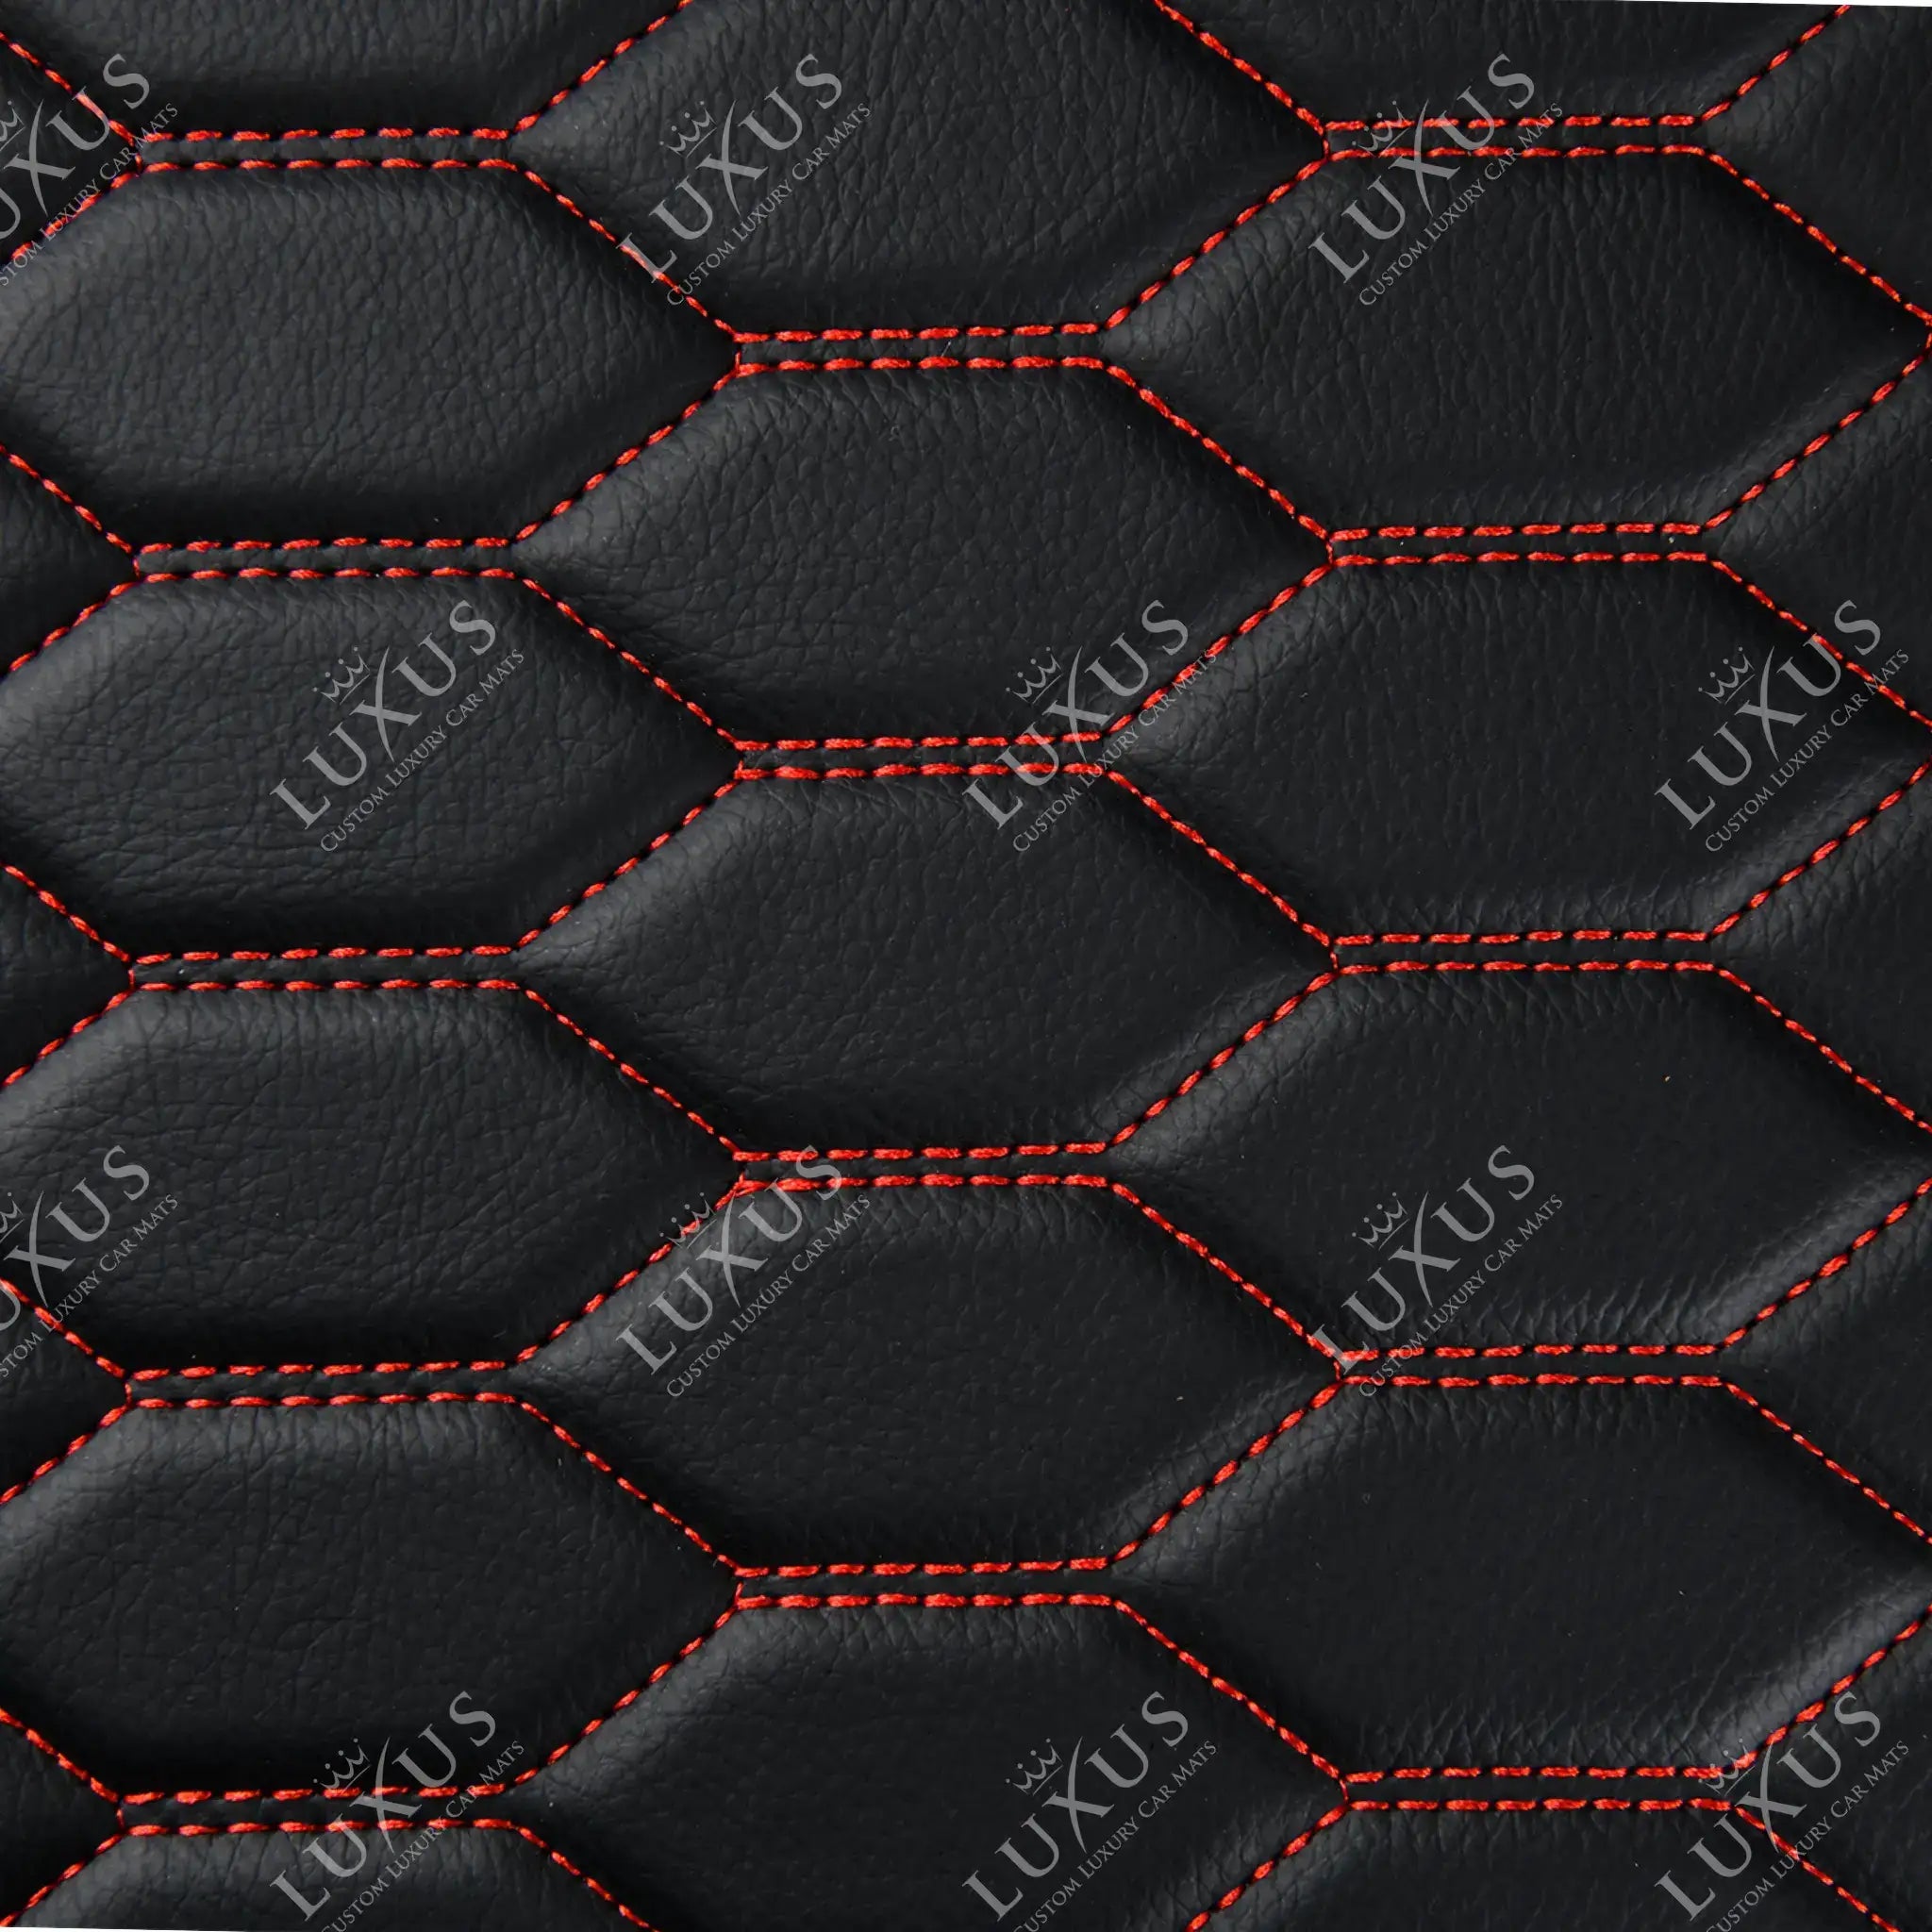 NEW Black & Red Stitching 3D Honeycomb Luxury Boot/Trunk Mat